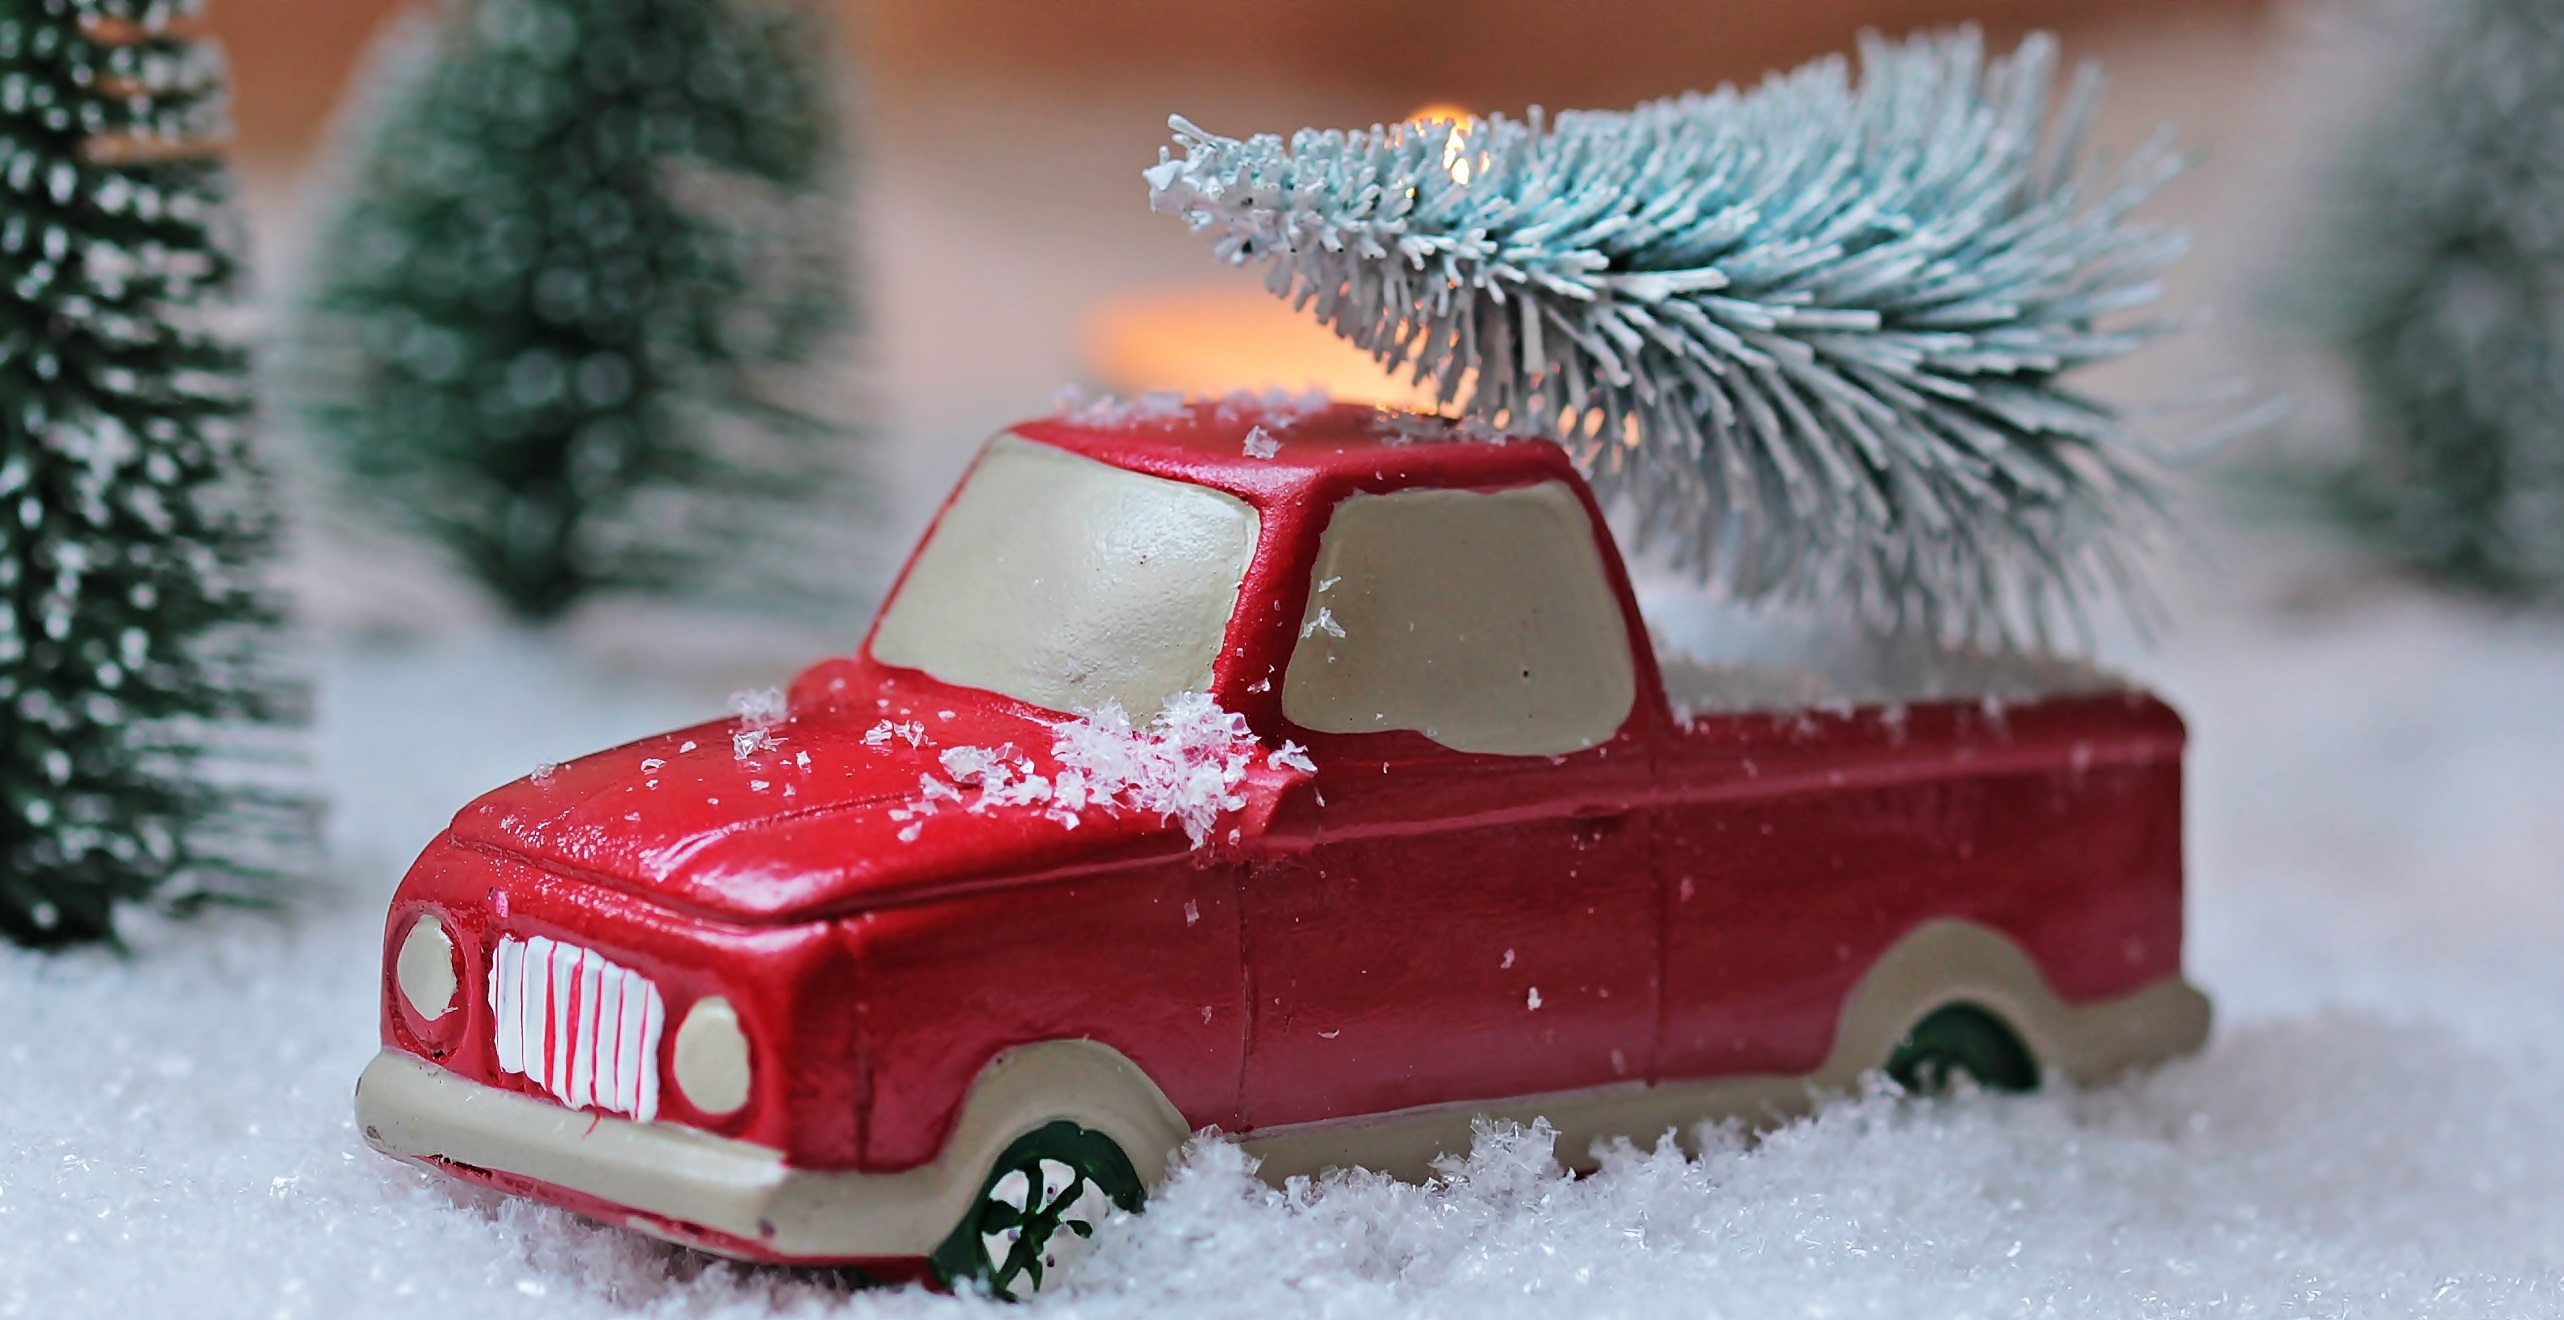 Small toy pickup truck in snow with wintry pine tree in bed of truck